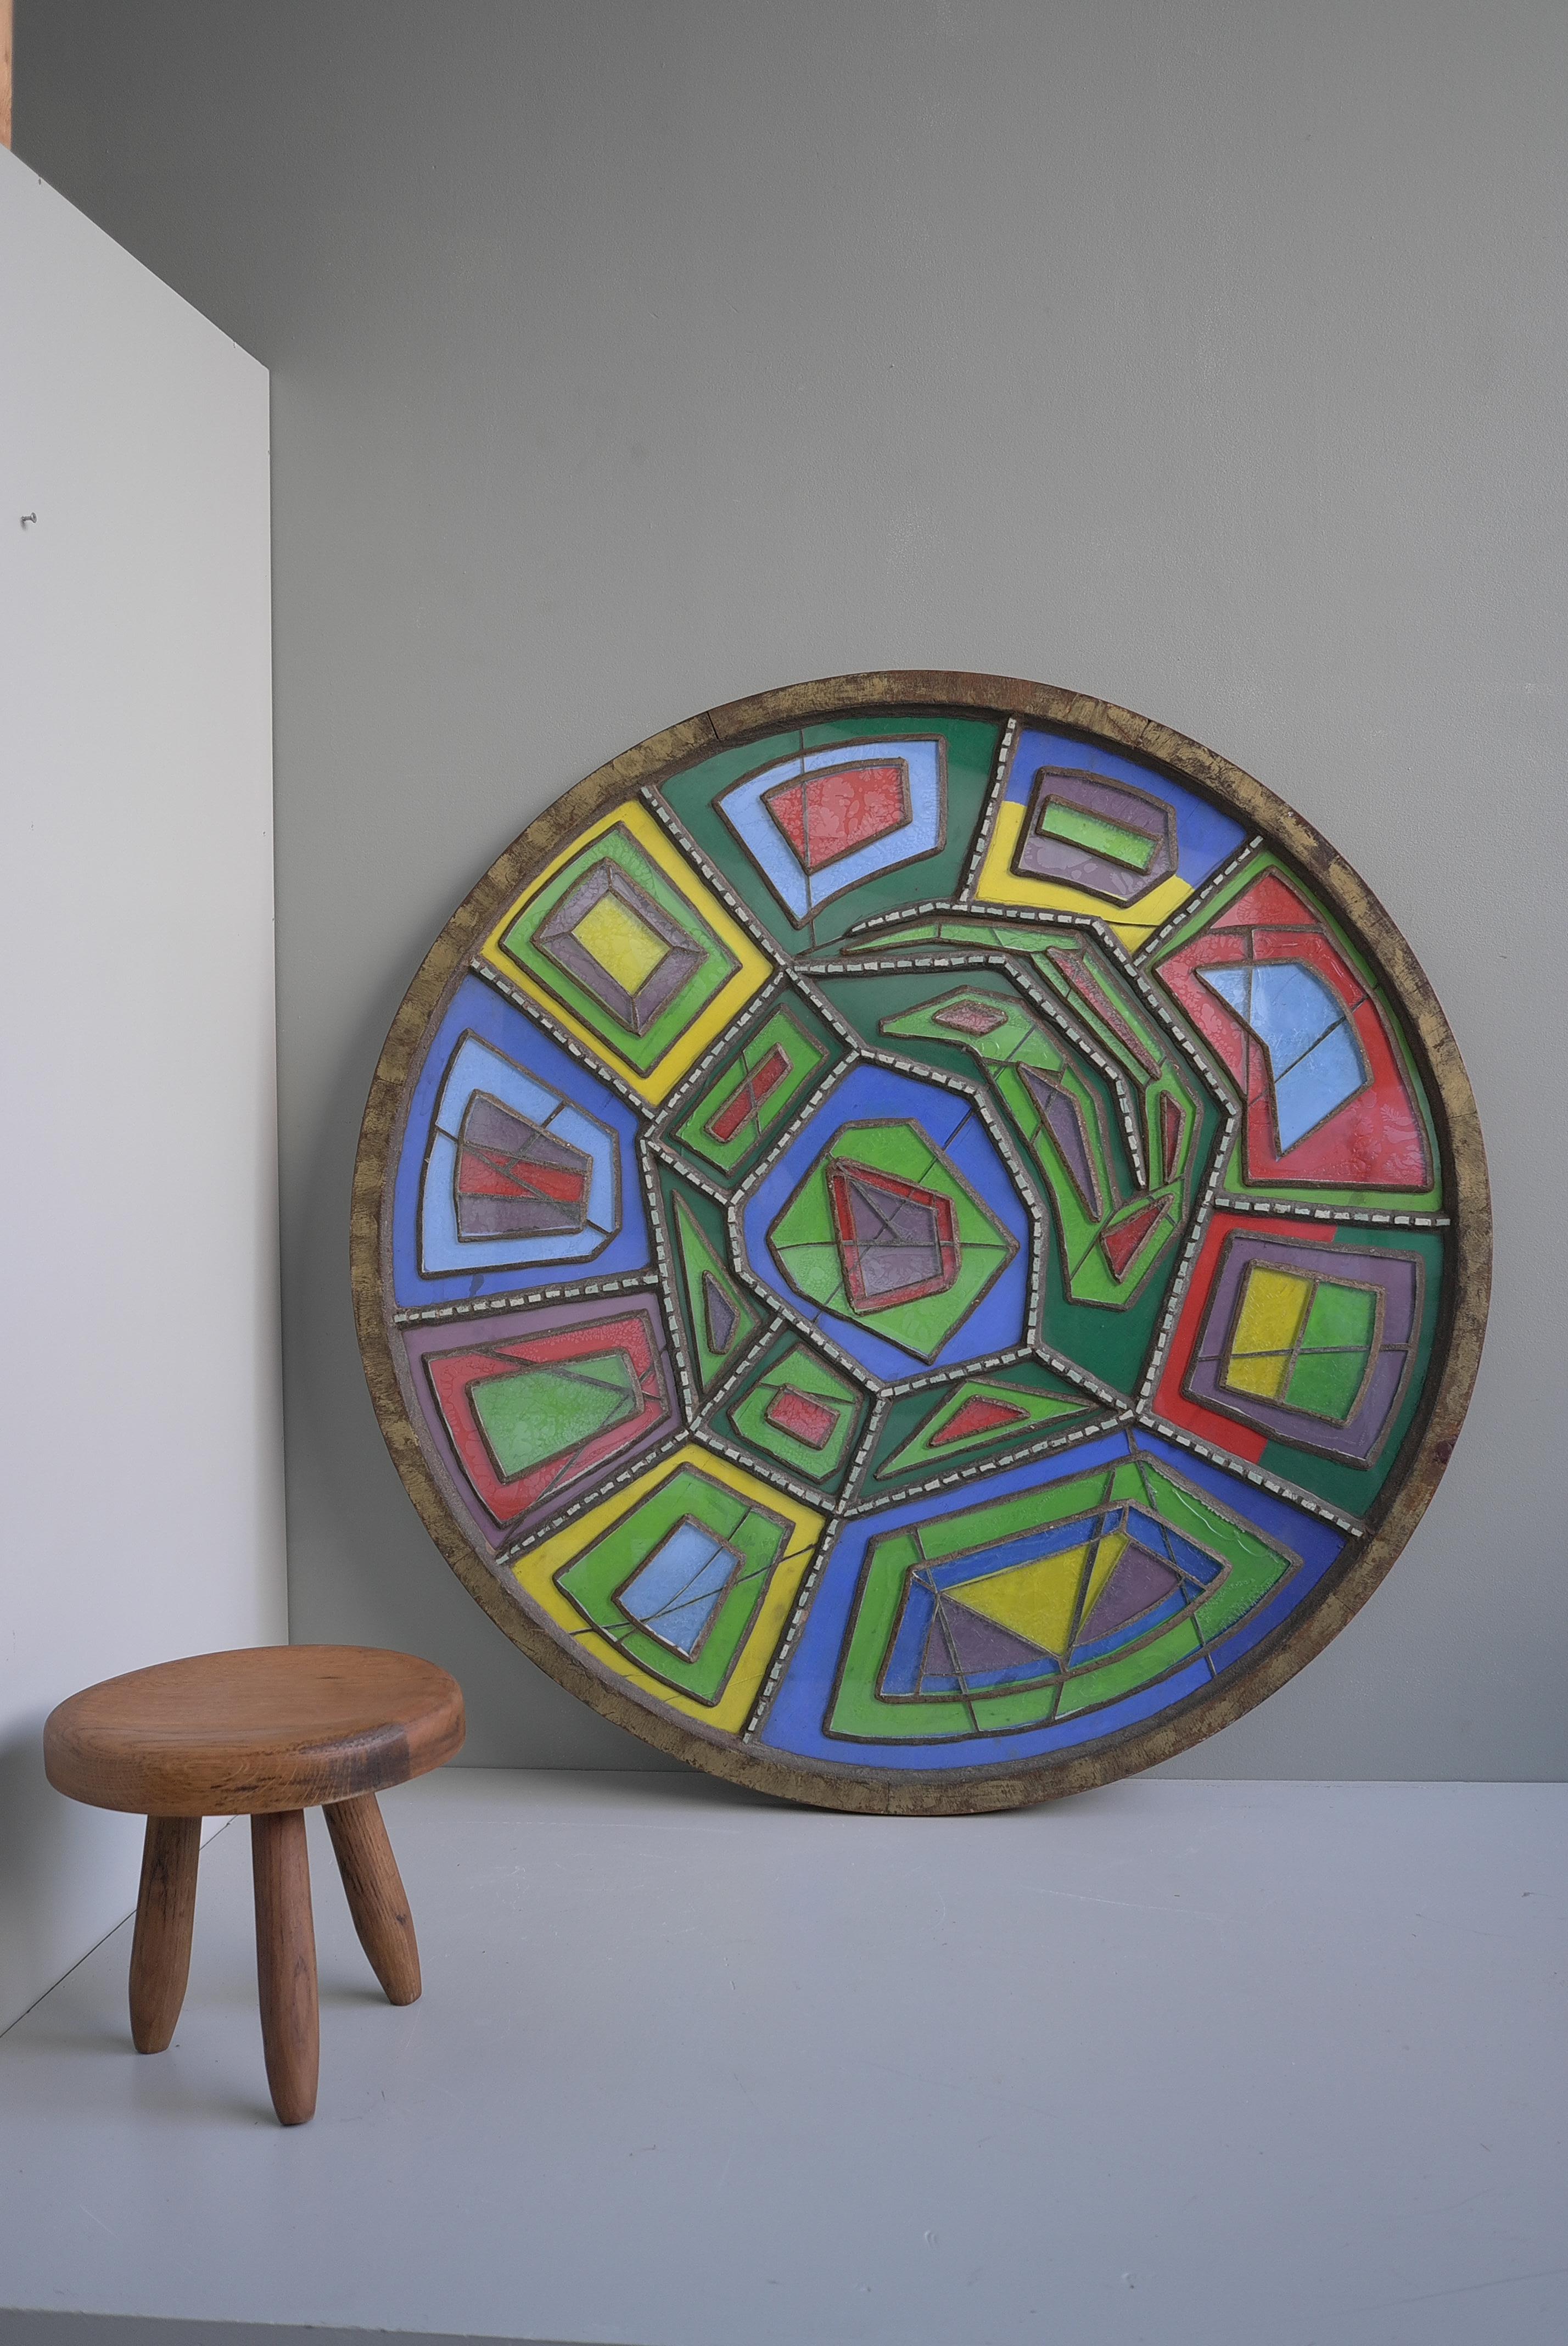 Large Midcentury Multicolored Round Glass and Concrete Wall Sculpture, 1950s For Sale 5